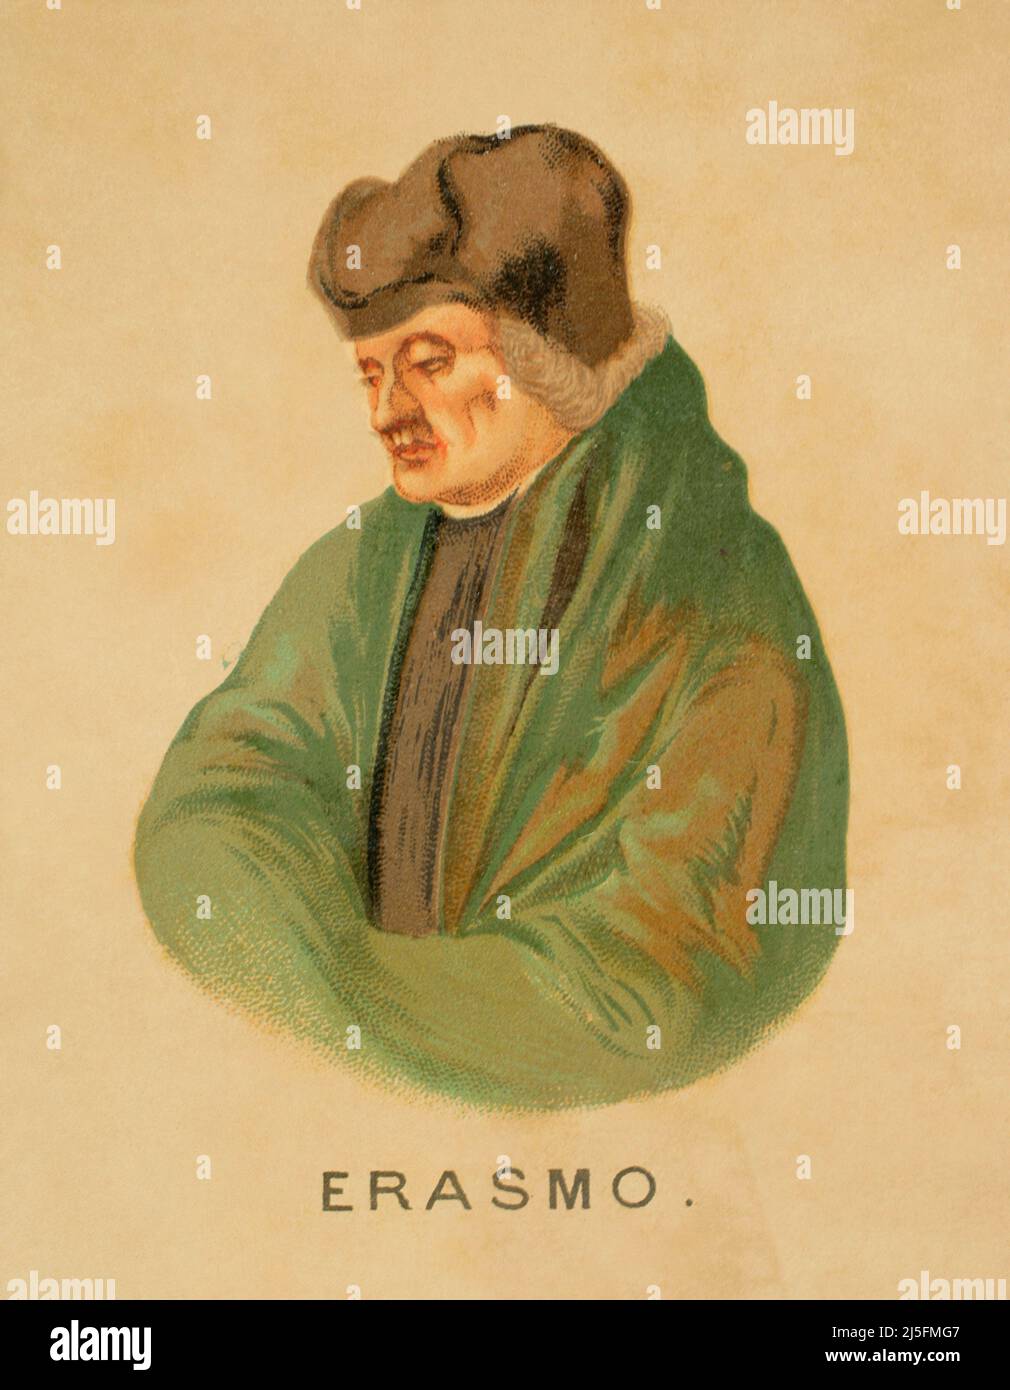 Erasmus (c. 1466-1536). Dutch theologian, philosopher and humanist. Portrait. Chromolithography. Historia Universal, by César Cantú. Volume VIII. Published in Barcelona, 1886. Stock Photo